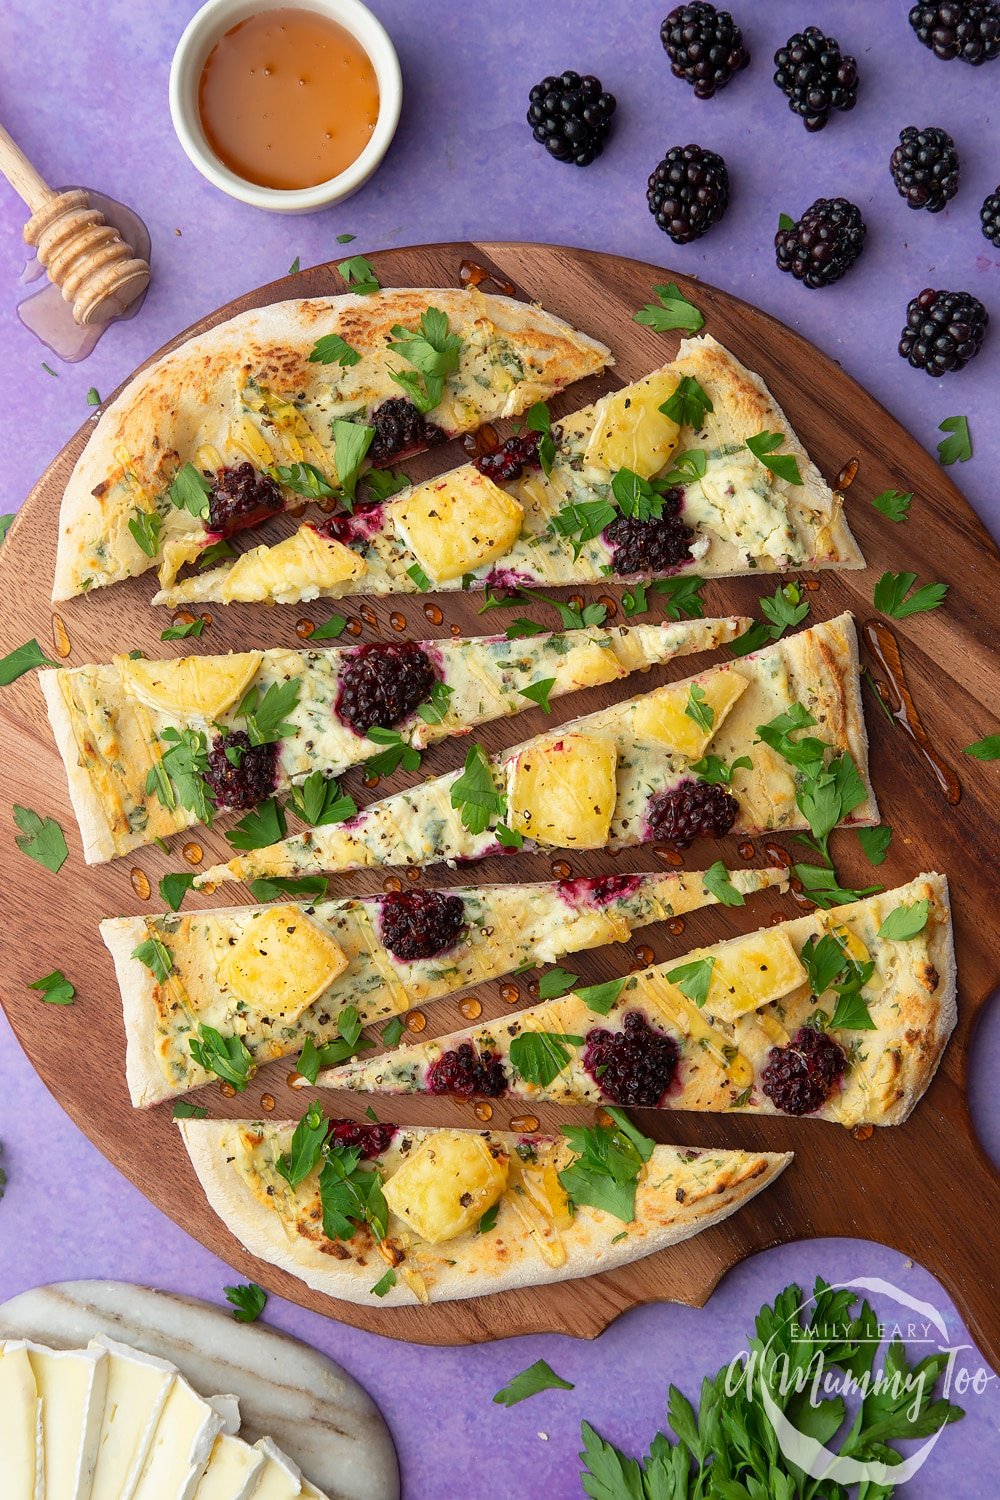 Brie and blackberry pizza sliced on a wooden board and scattered with fresh parsley and drizzled with honey. Ingredients surround the board.